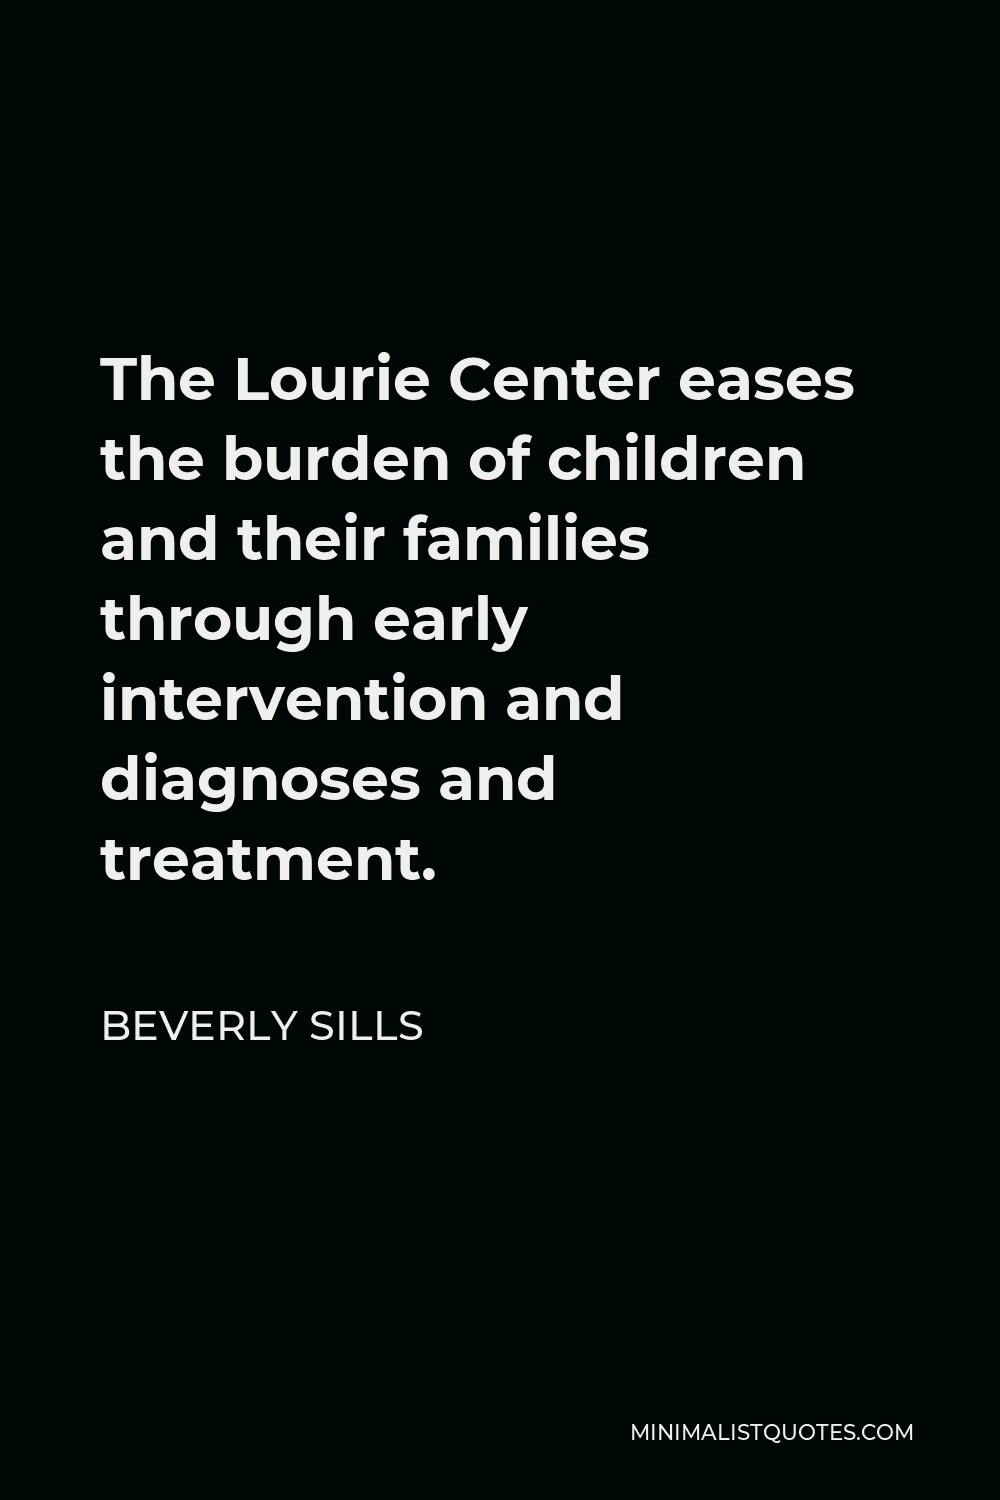 Beverly Sills Quote - The Lourie Center eases the burden of children and their families through early intervention and diagnoses and treatment.